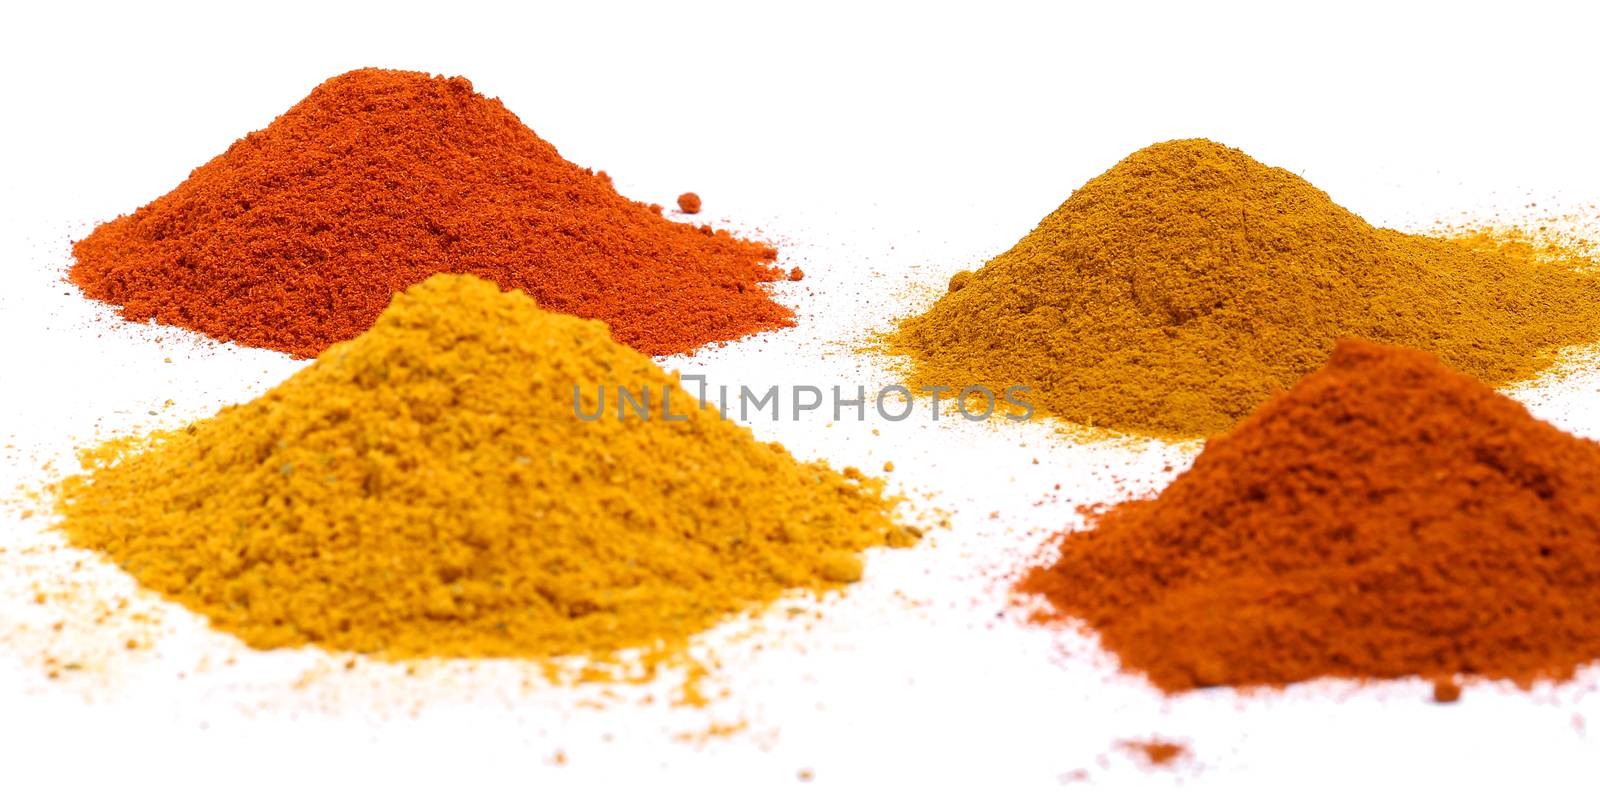 Ingredients. Colorful spices on a white background